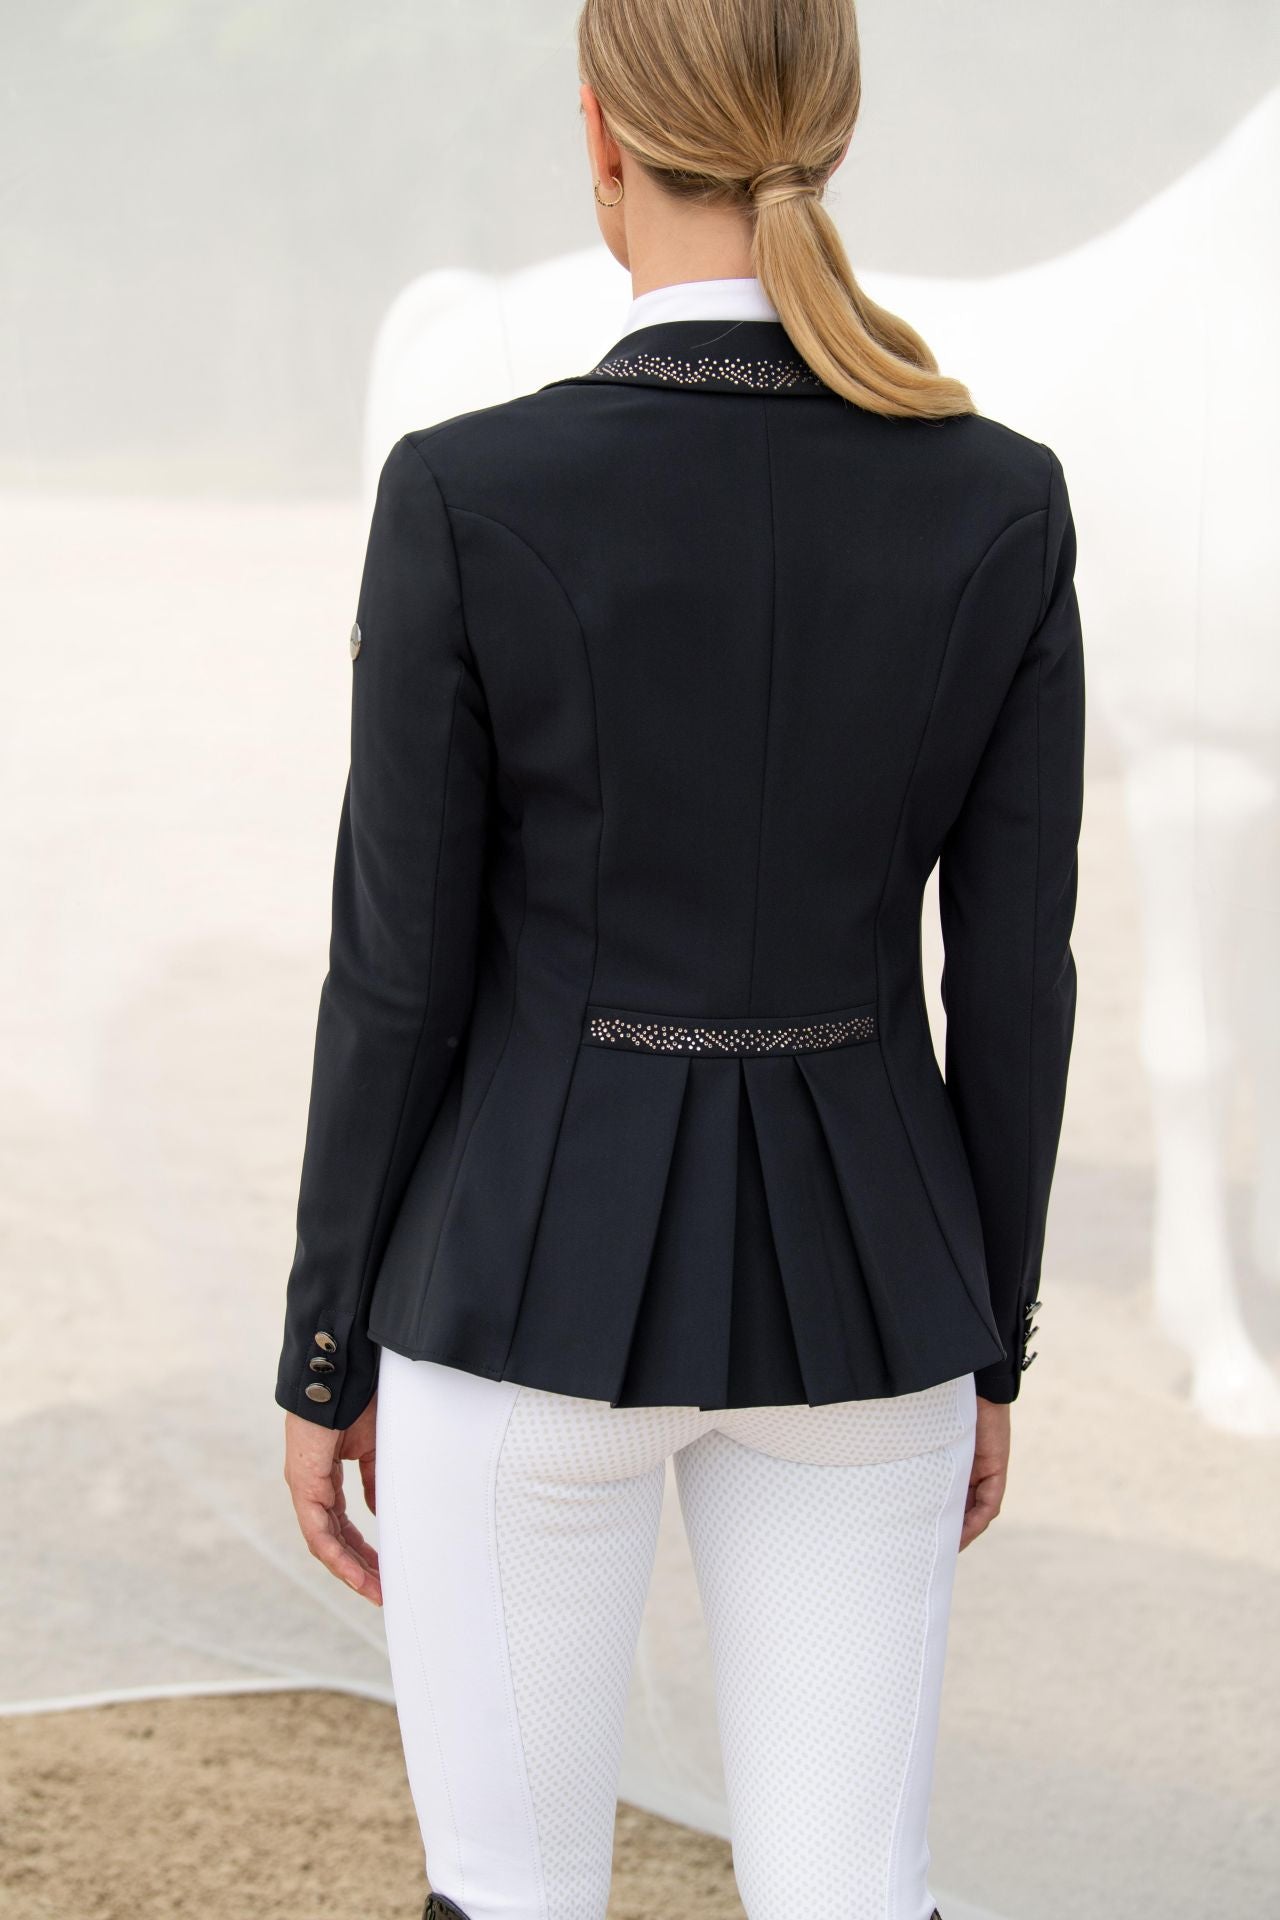 Pikeur Competition Jacket with Rhinestone Applicaton 2100